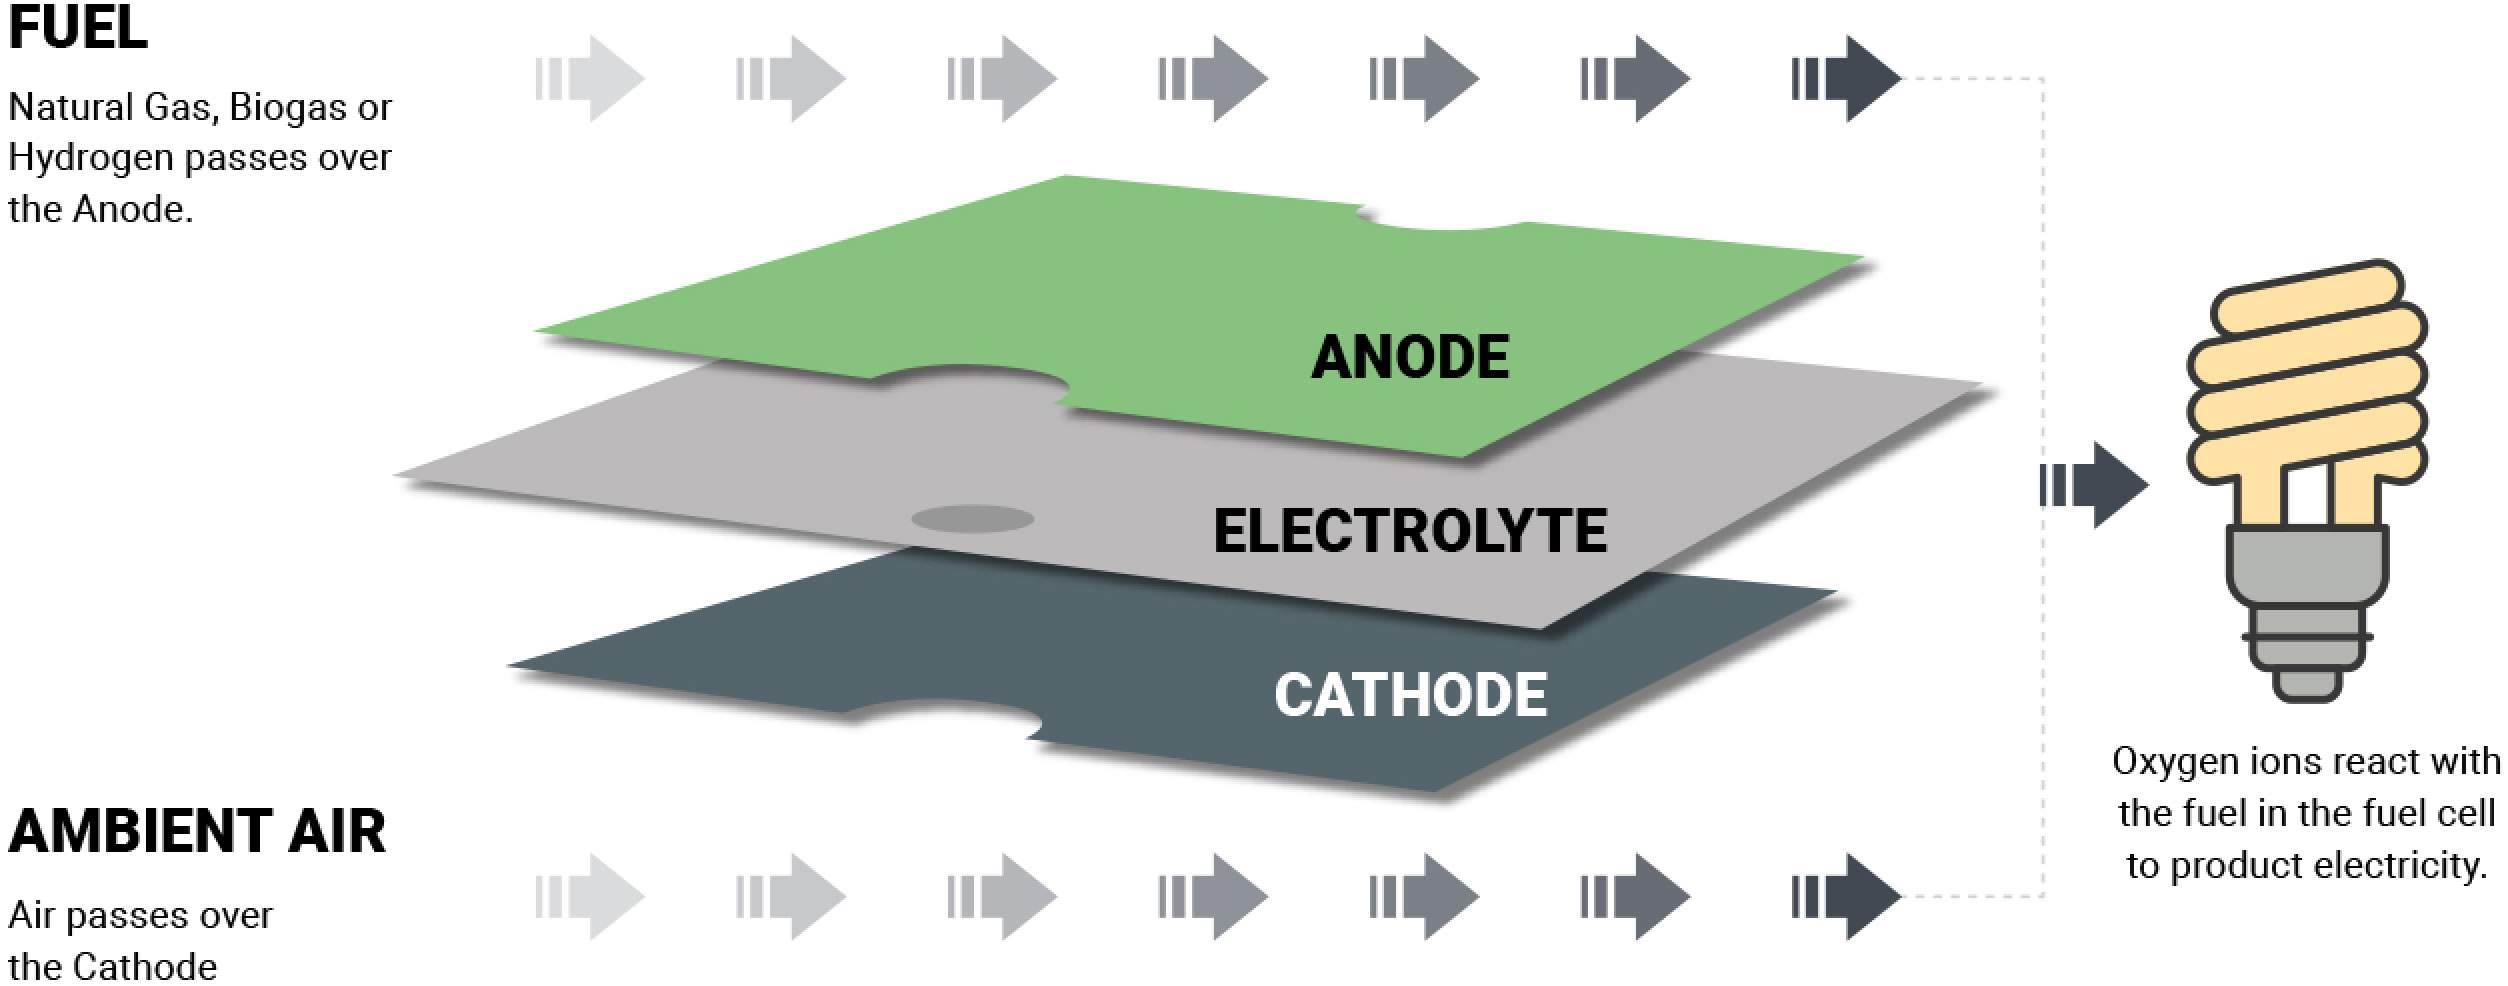 A diagram showing how fuel and ambient air produce electricity